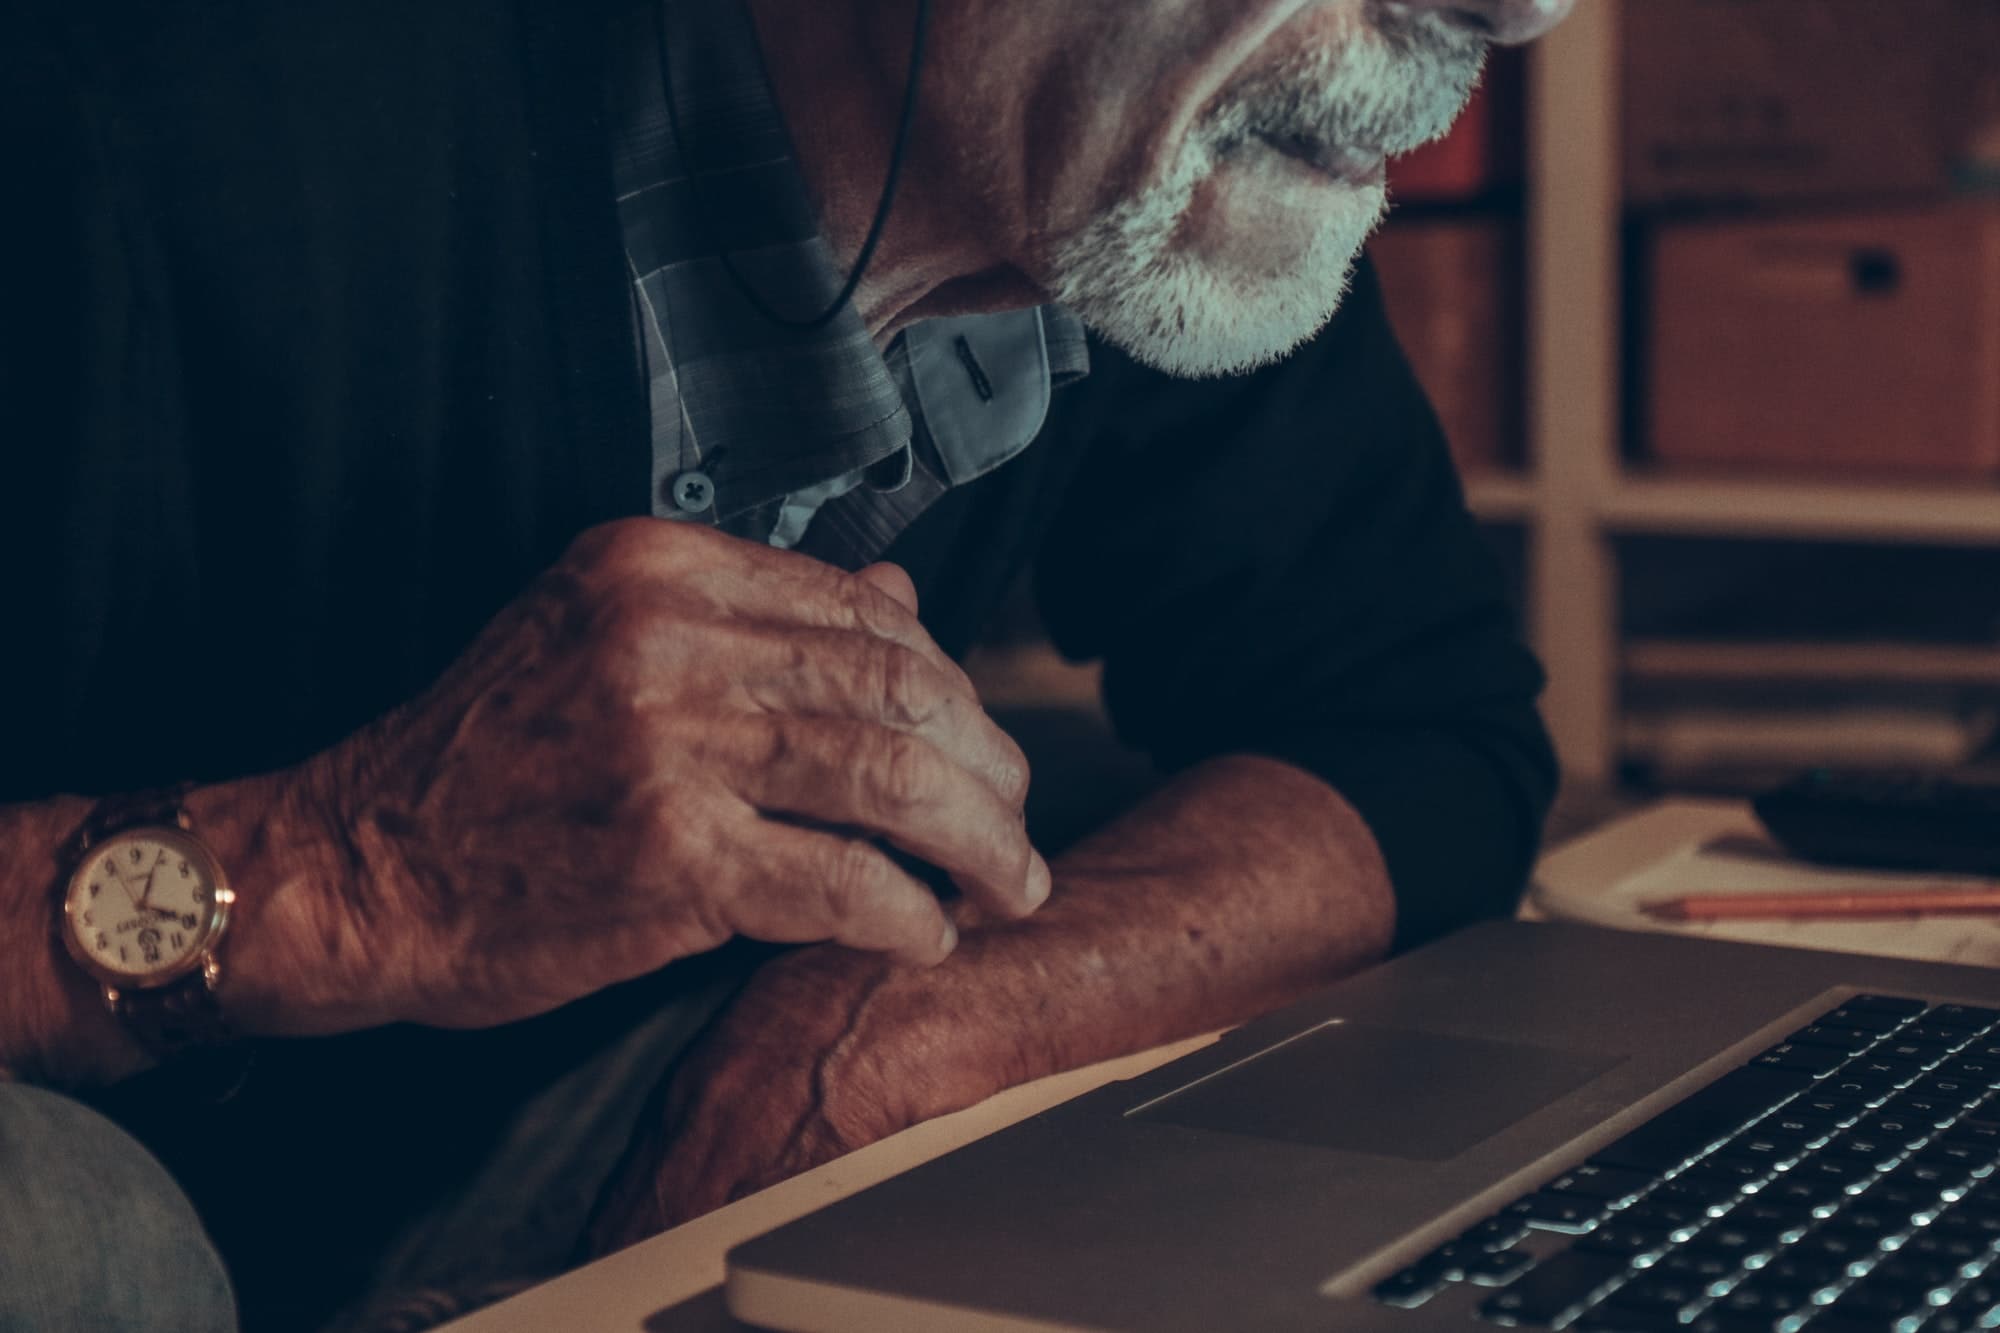 Profile of old man using a laptop